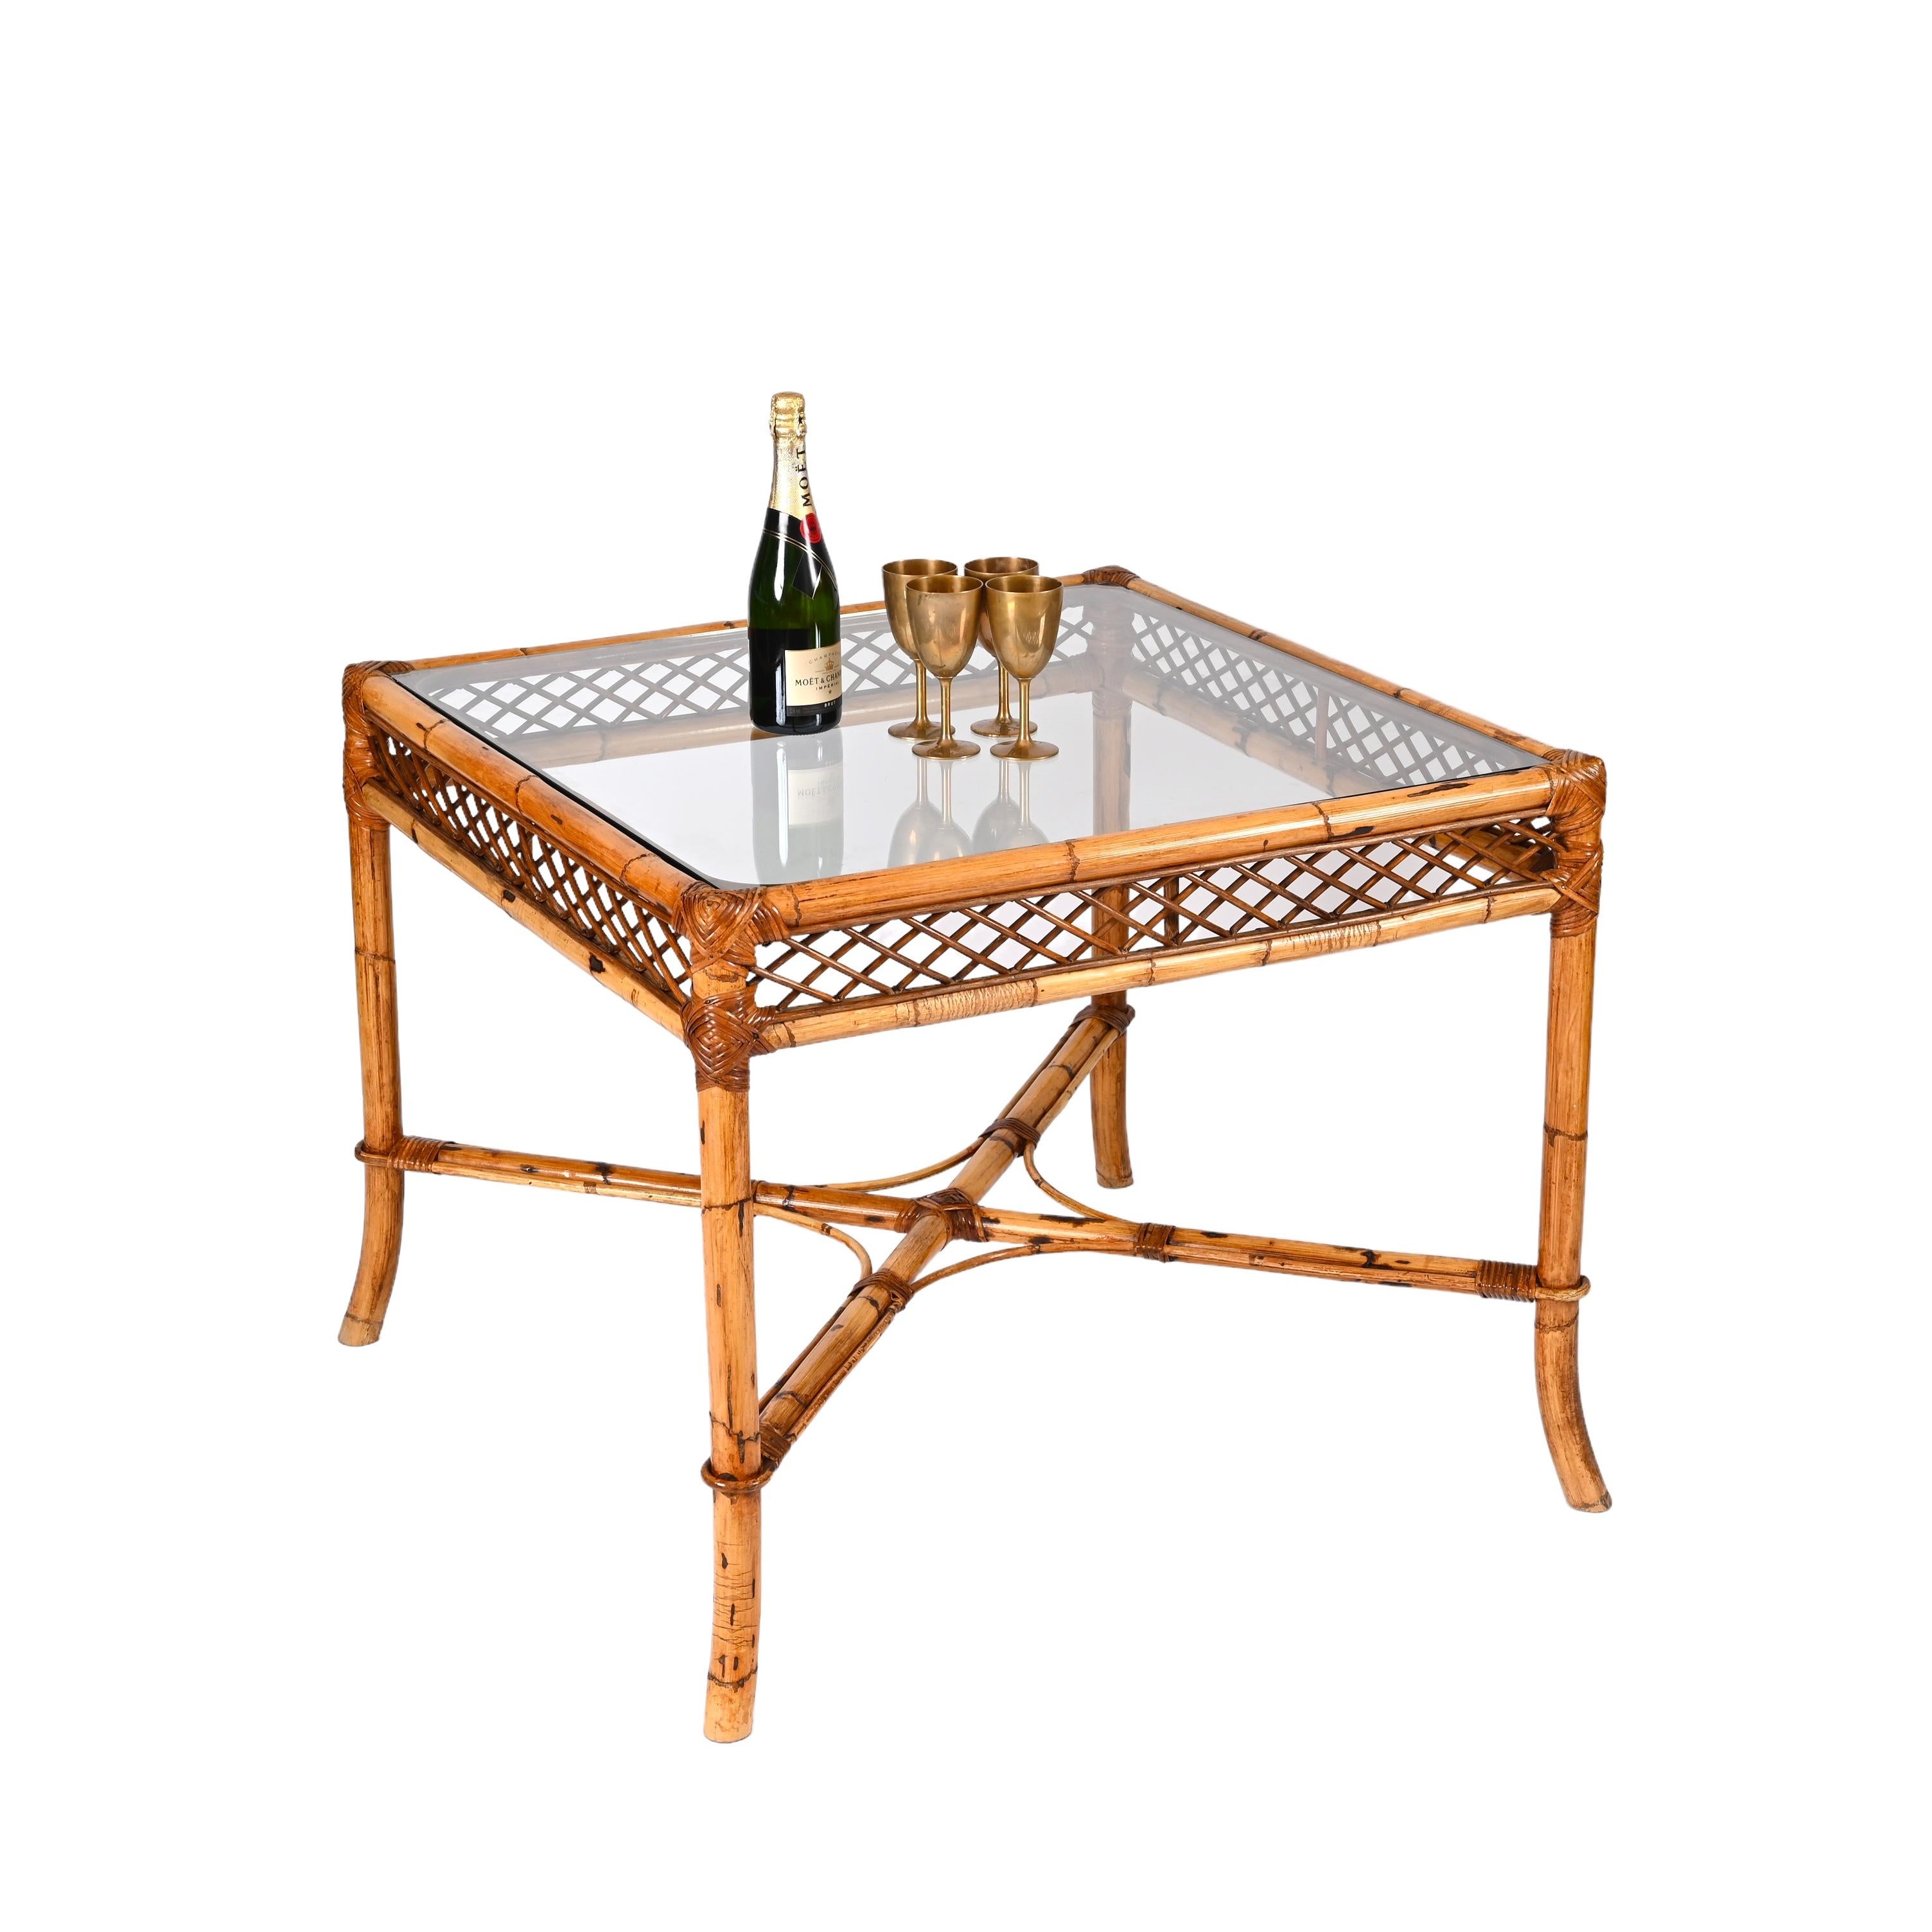 Midcentury Vivai del Sud Squared Bamboo Italian Dining Table with Glass Top 1960 For Sale 11